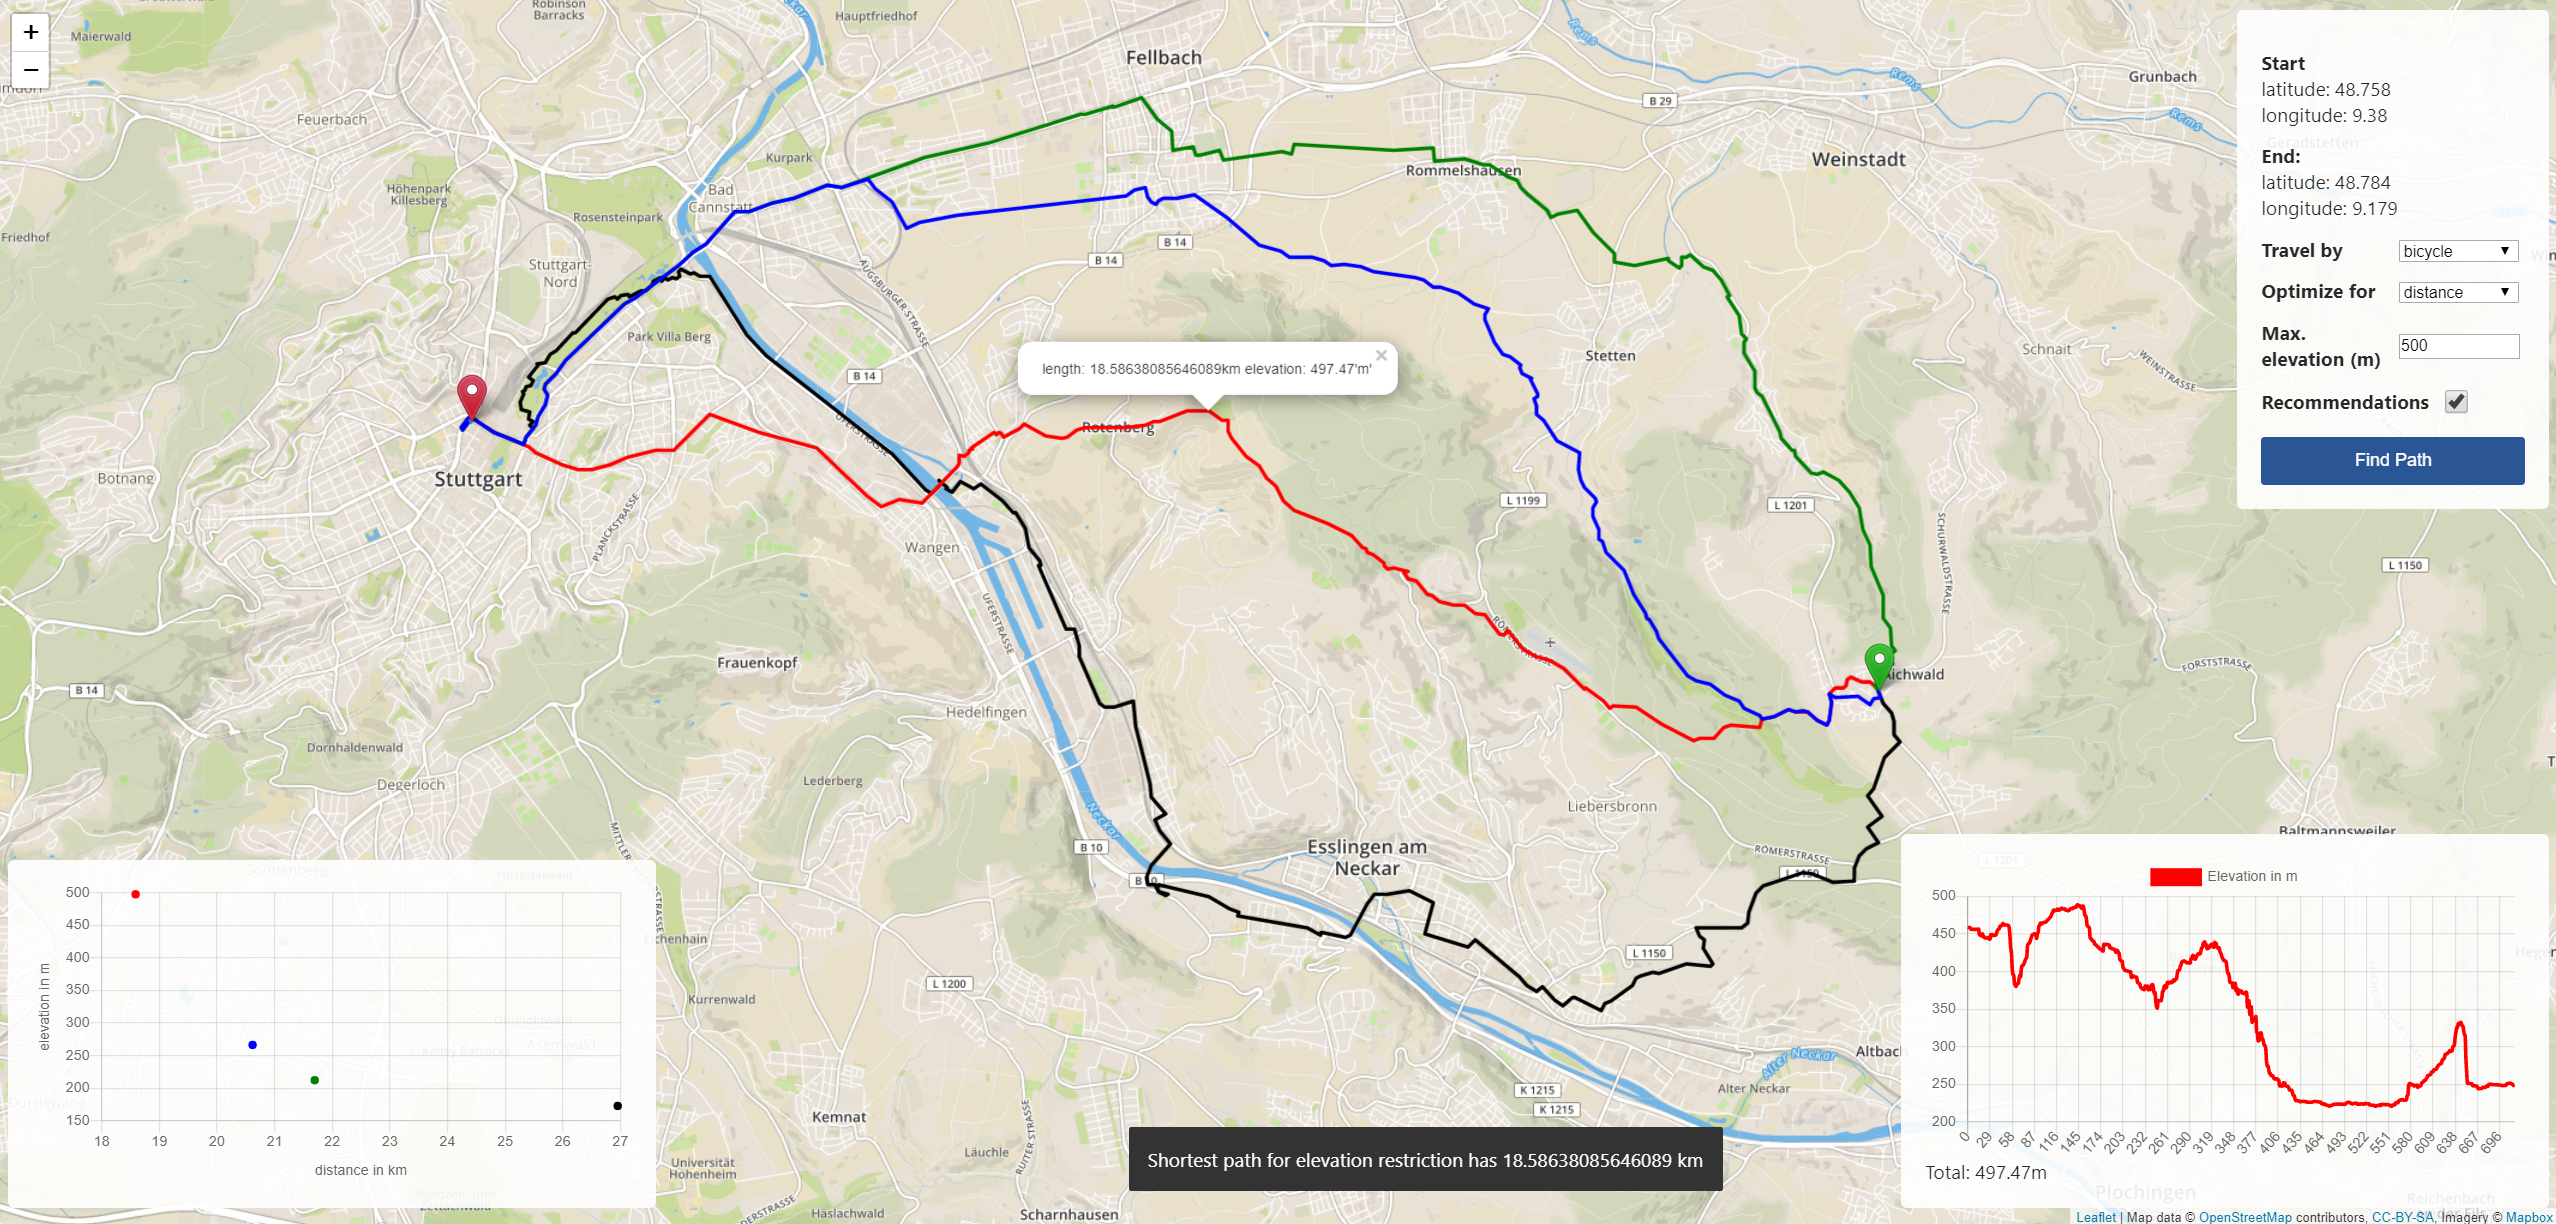 osm_bike_example.png